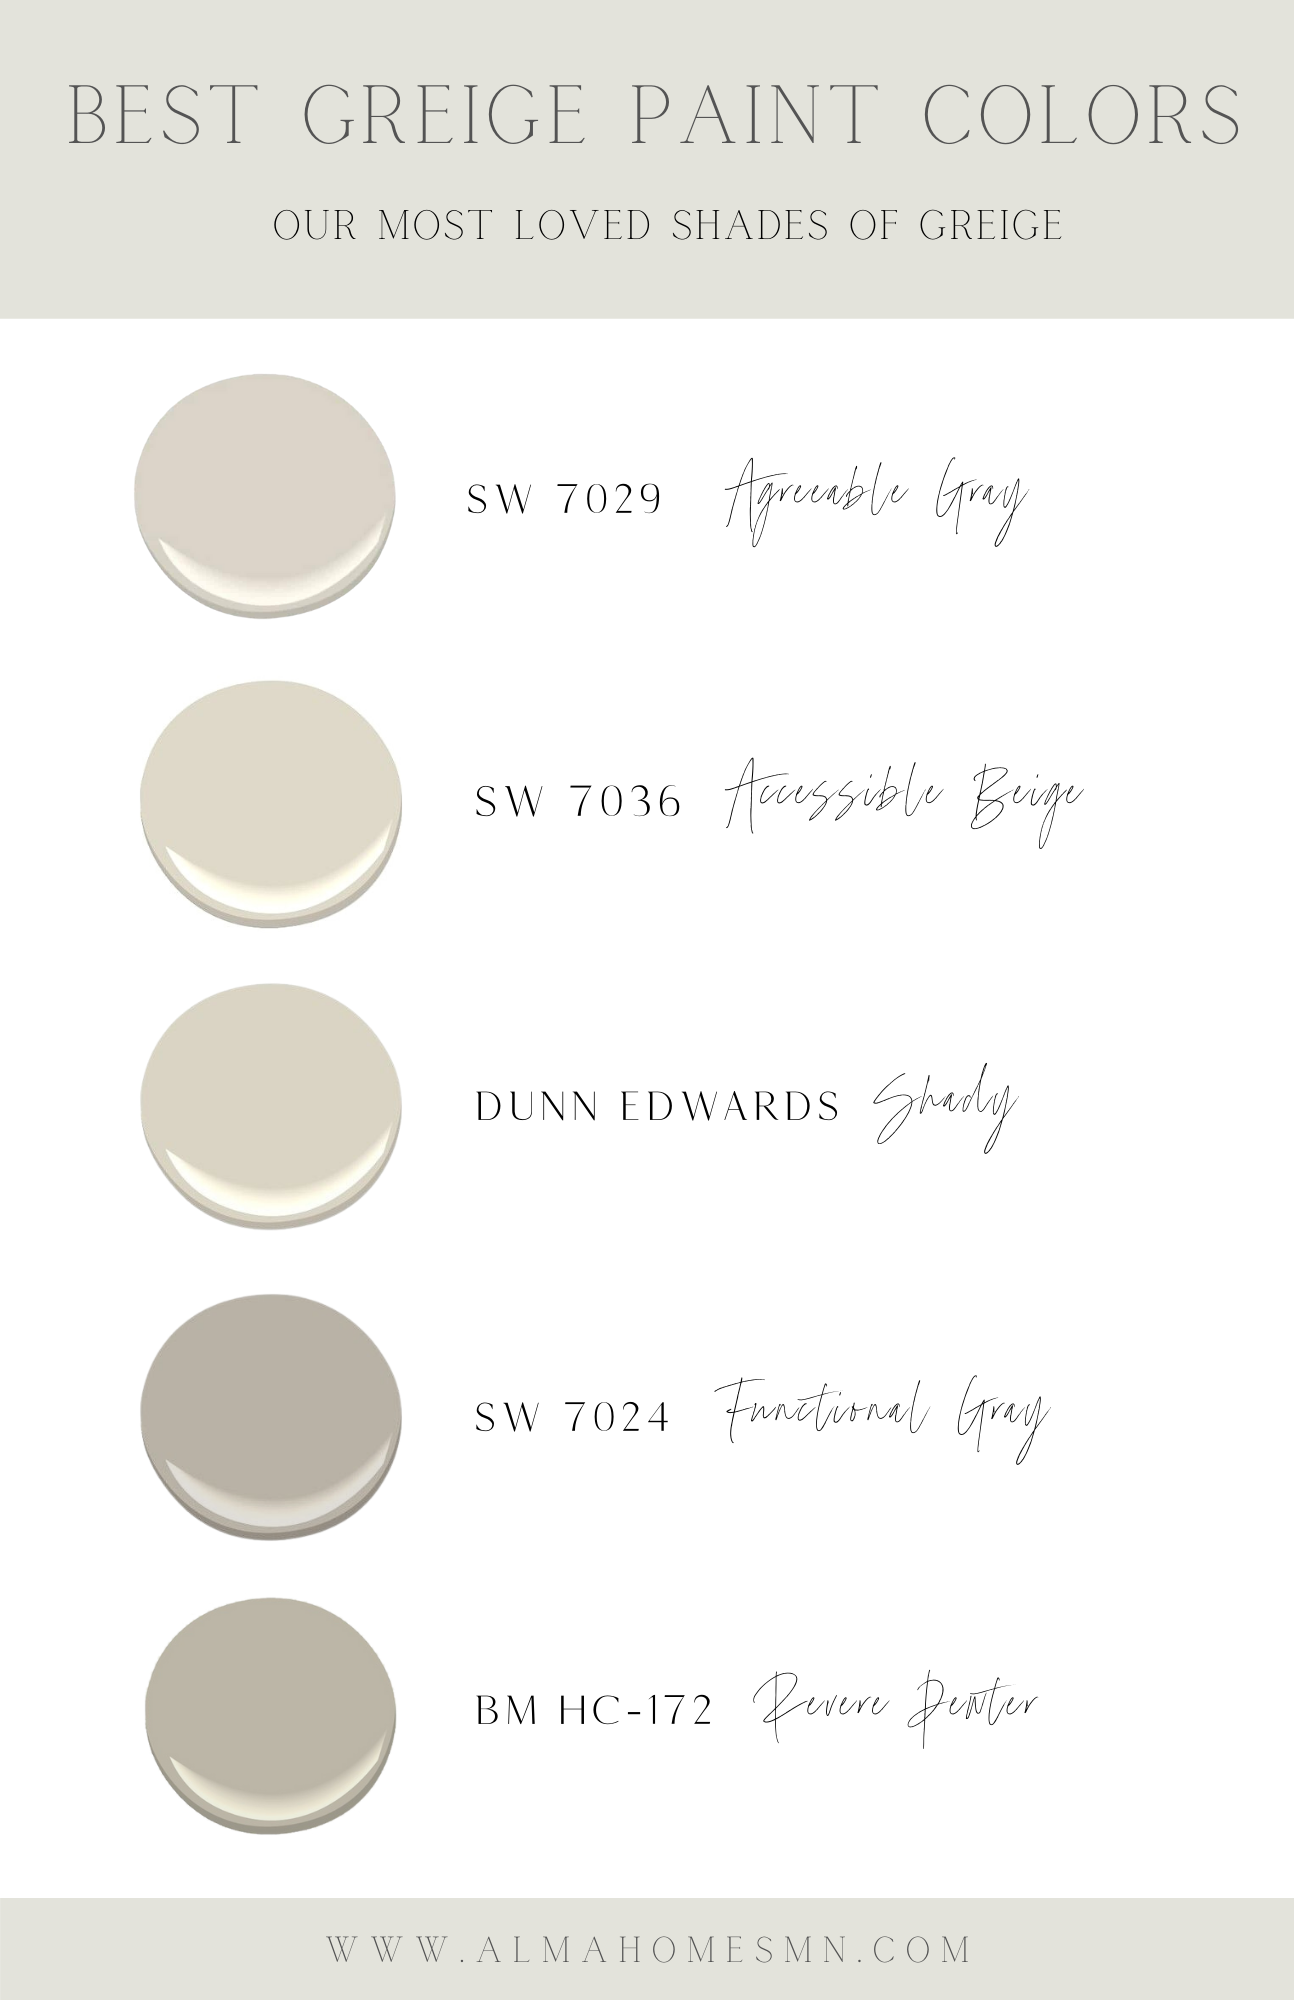 The Best Greige Paint Colors for Cabinetry | Alma Homes